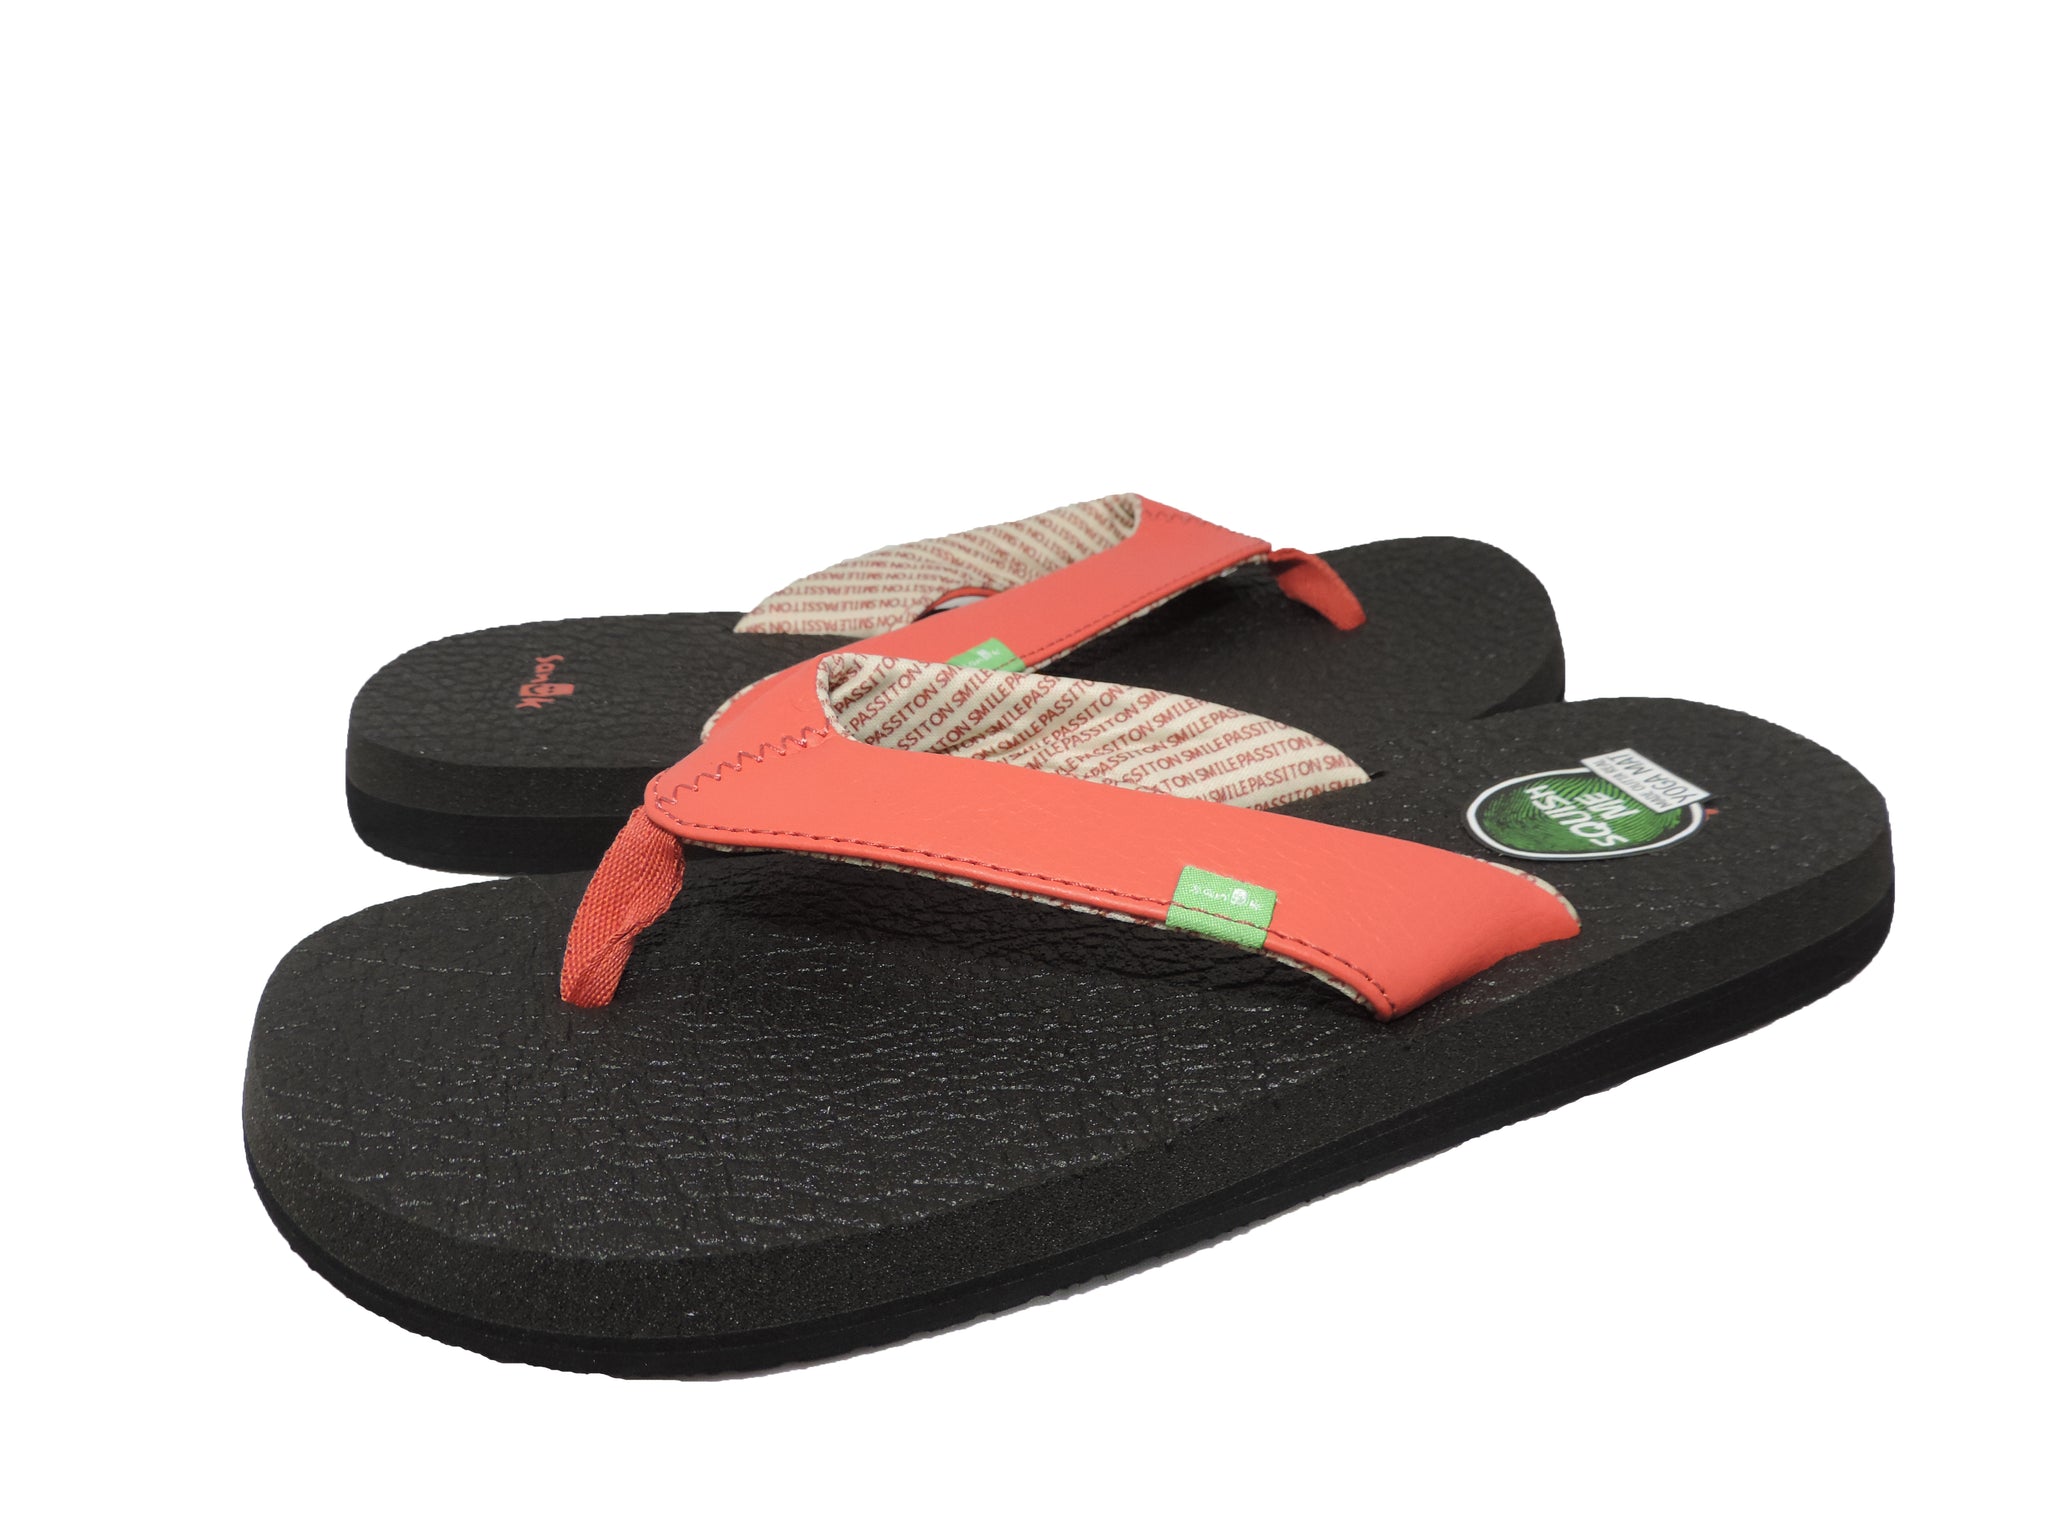 Purchase Yoga Sandals, Yoga for your Feet